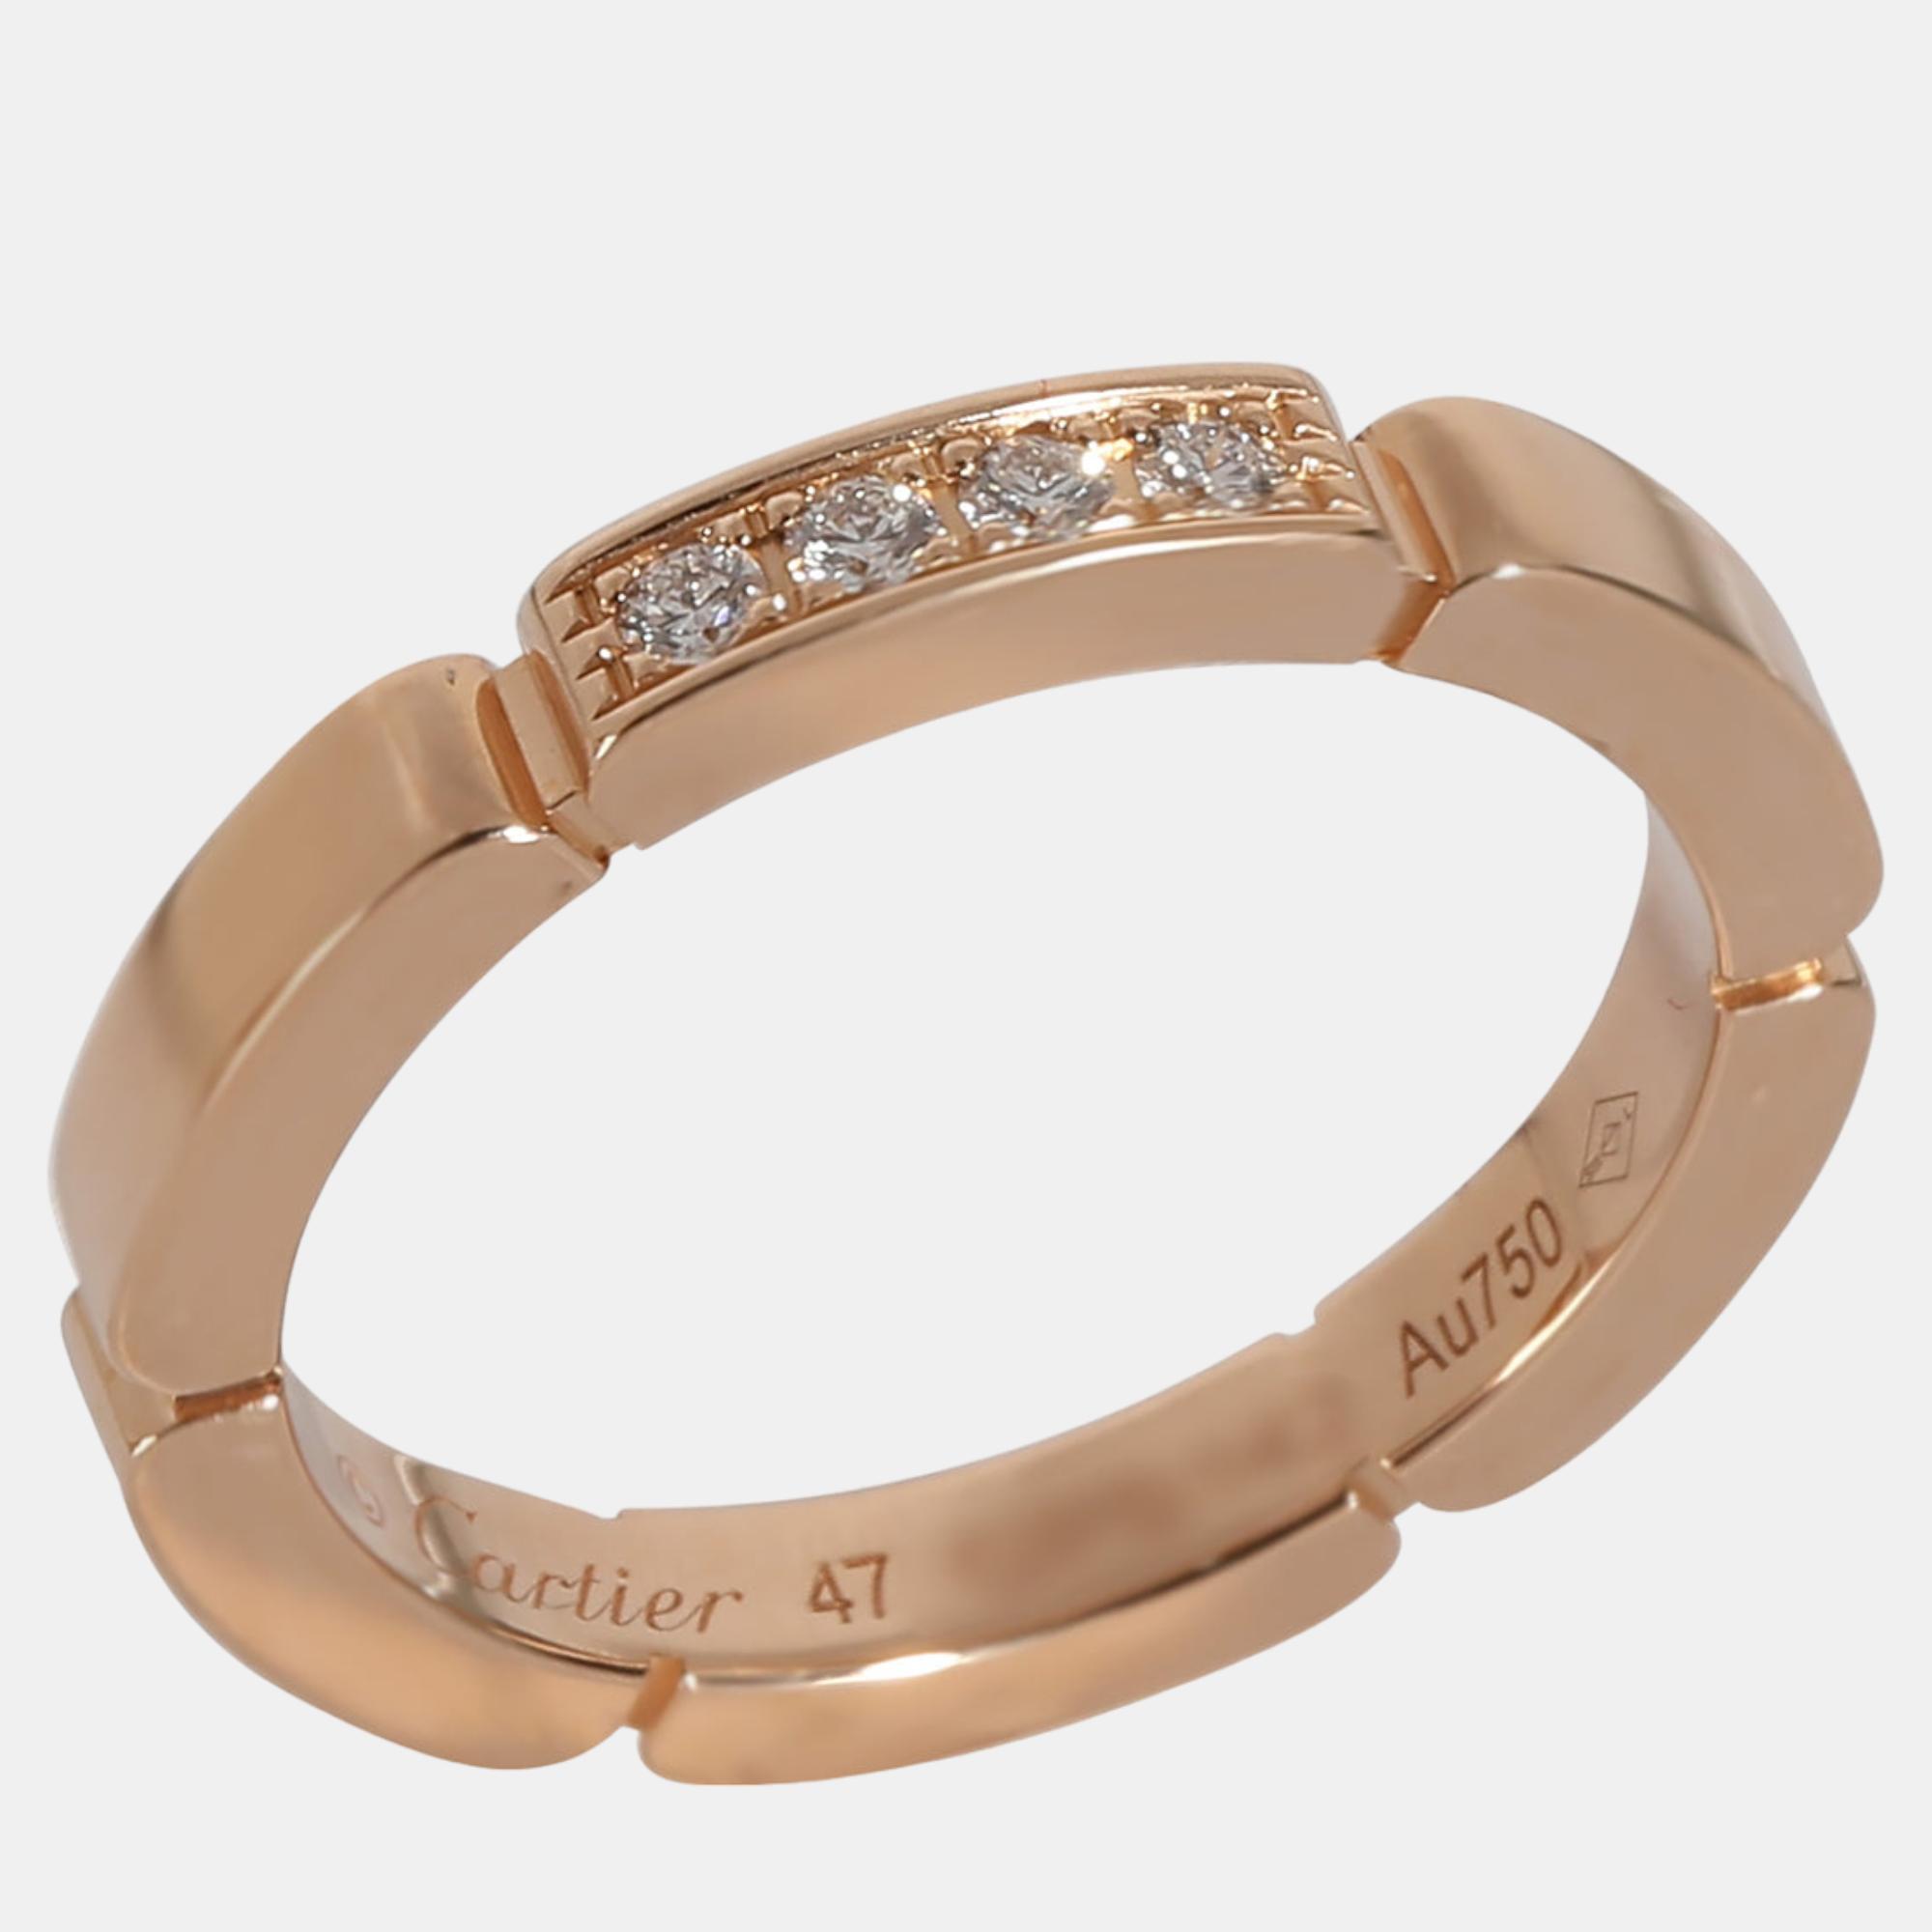 A Cartier ring that promises to stand out on your hand. It is a masterfully crafted piece of jewelry that embodies timeless luxury and sophisticated elegance.